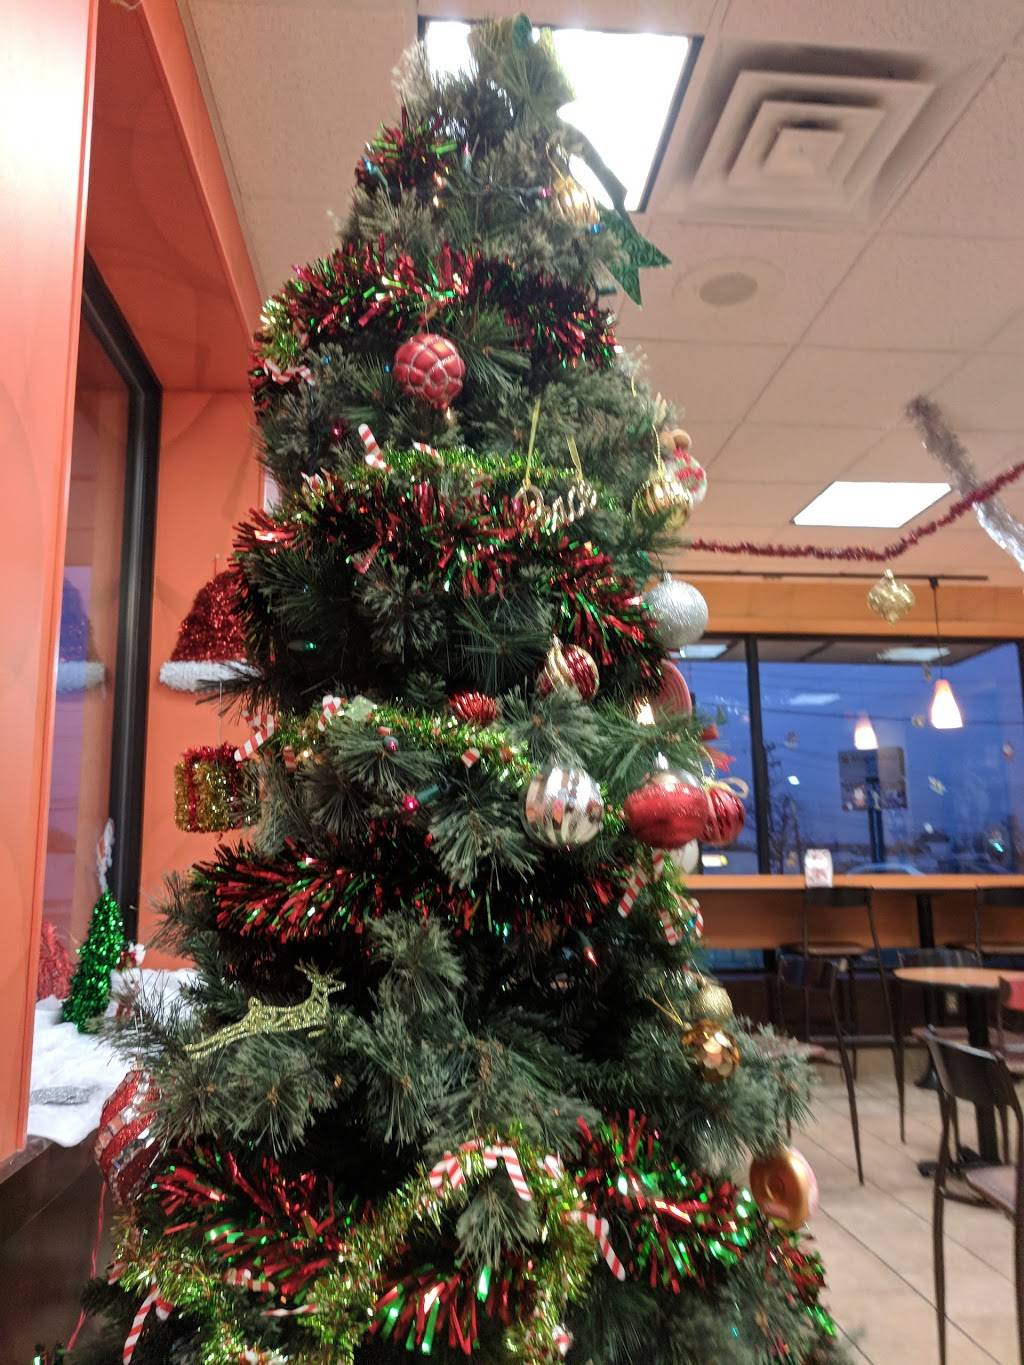 Dunkin Donuts | cafe | 240 S Summit Ave # 256, Hackensack, NJ 07601, USA | 2013424790 OR +1 201-342-4790